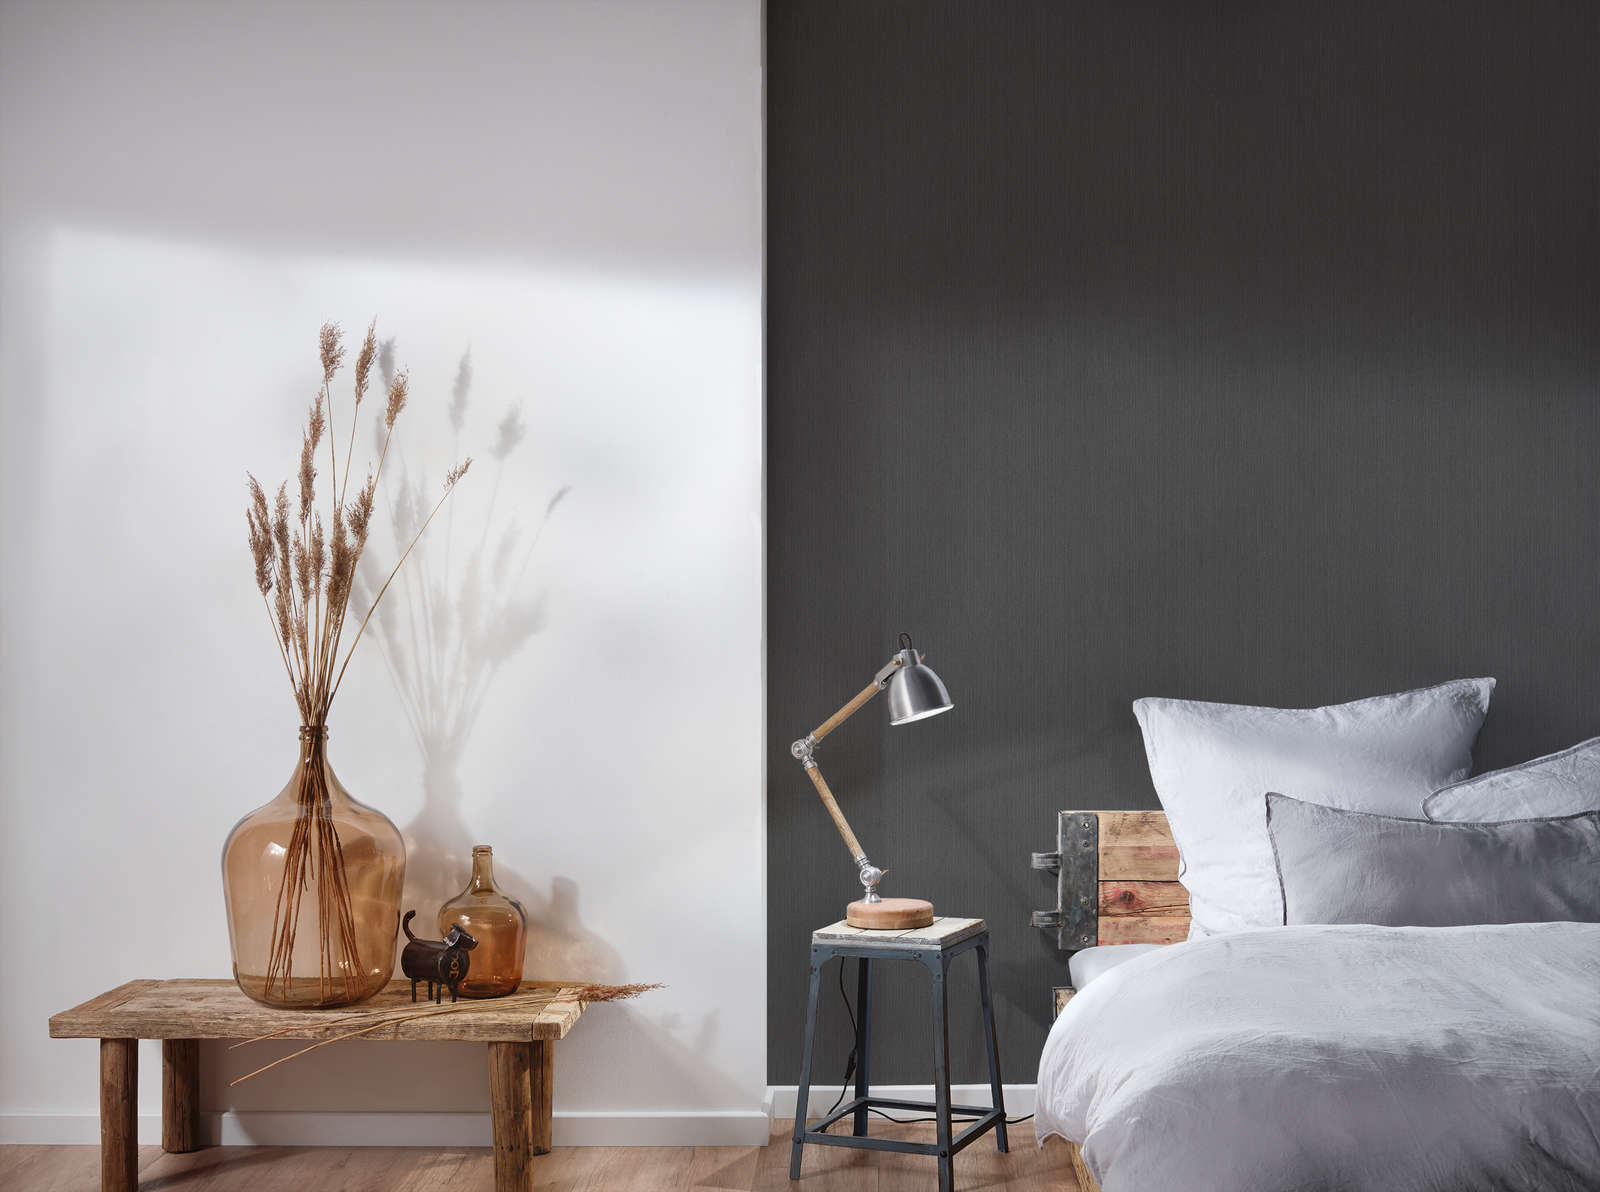             Wallpaper graphite grey with texture effect & satin finish
        